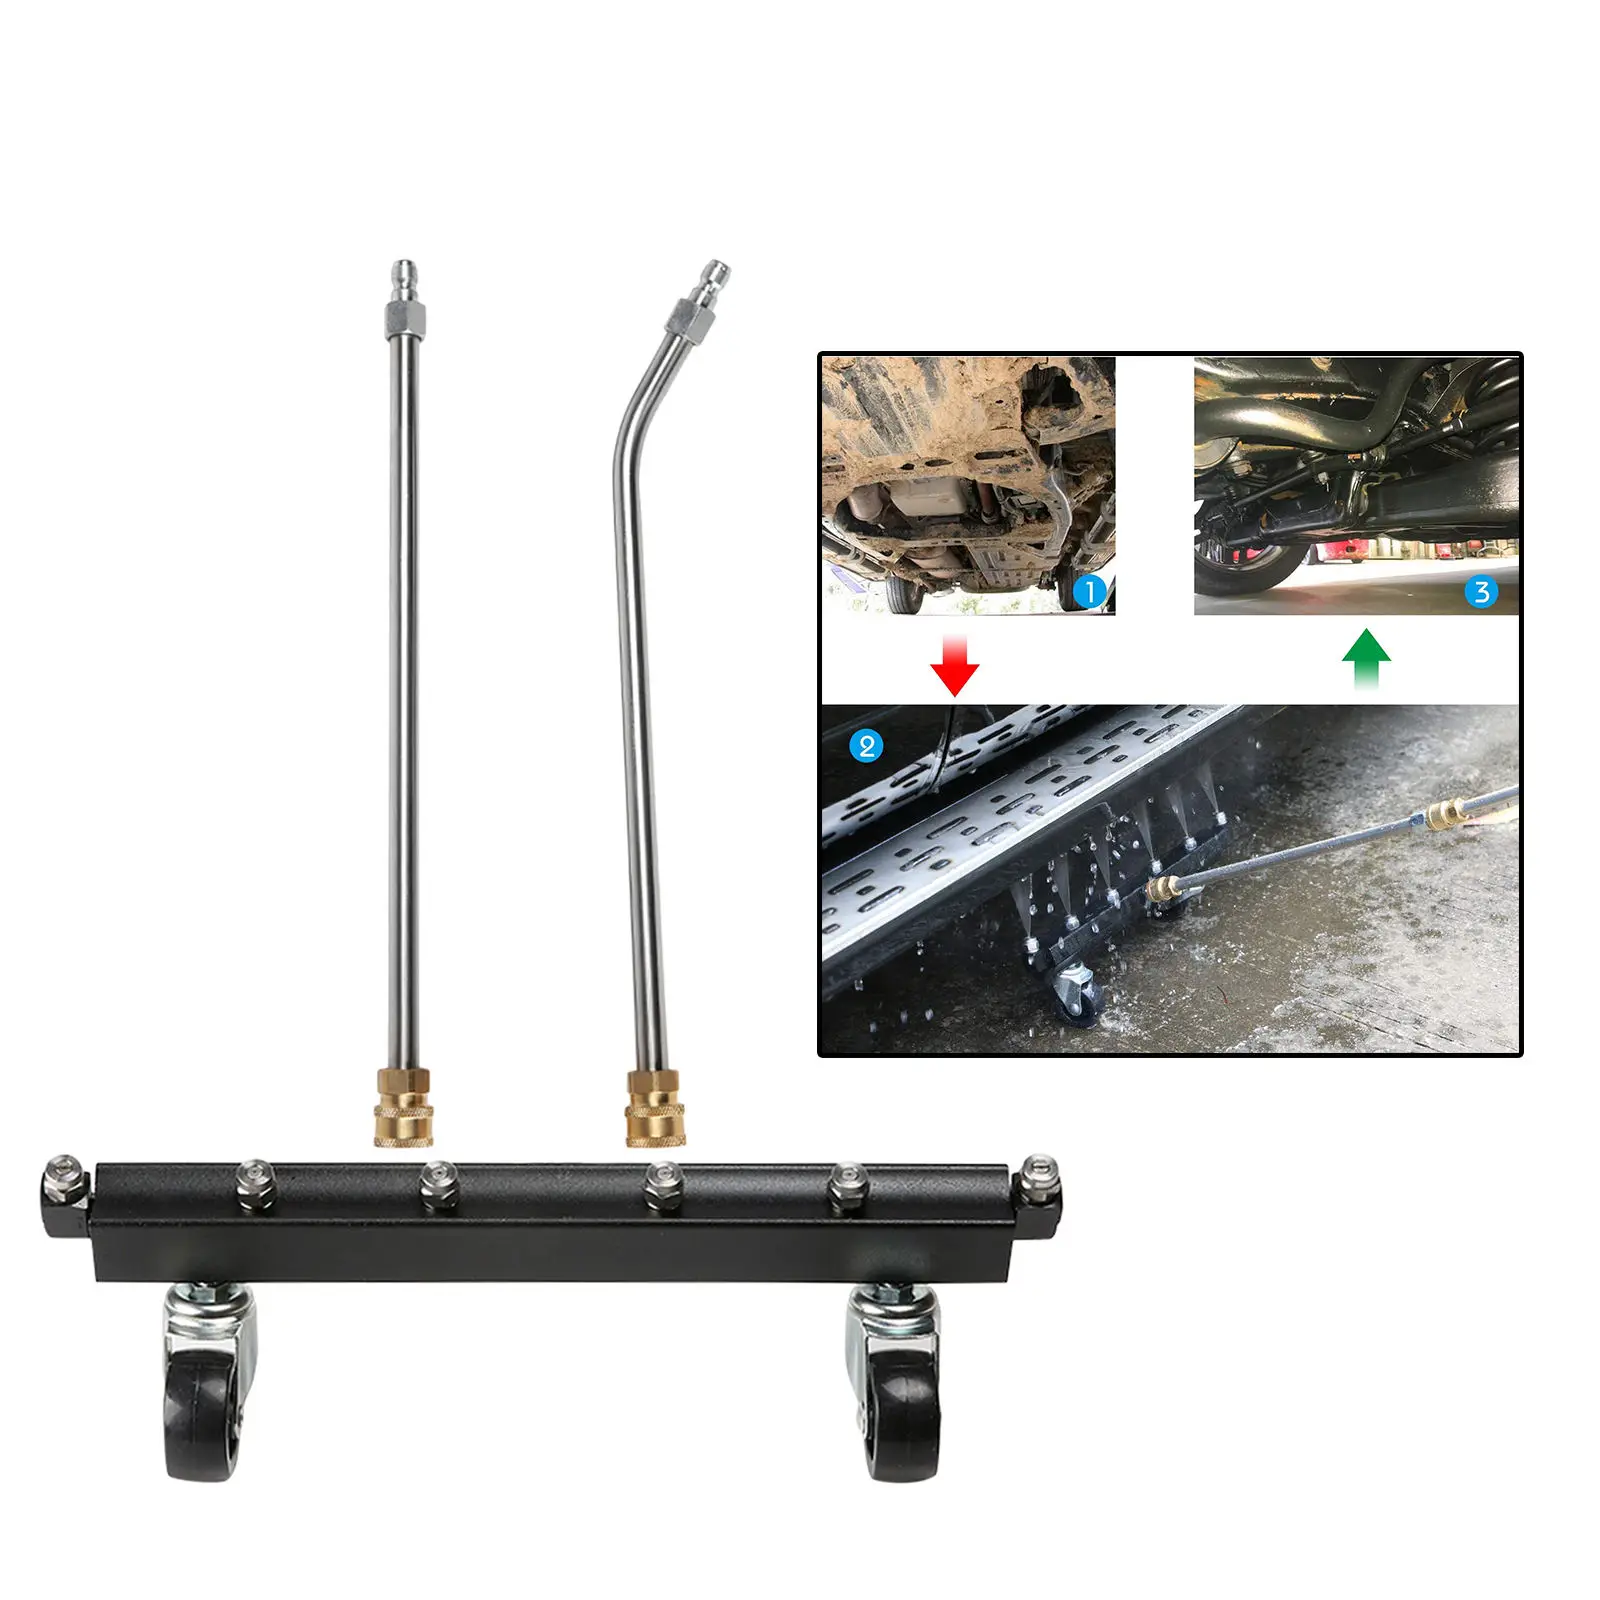 15inch Pressure Washer Attchment Undercarriage Cleaner with 6 Nozzles and 2 Extension Wands for Car Underbody Cleaning